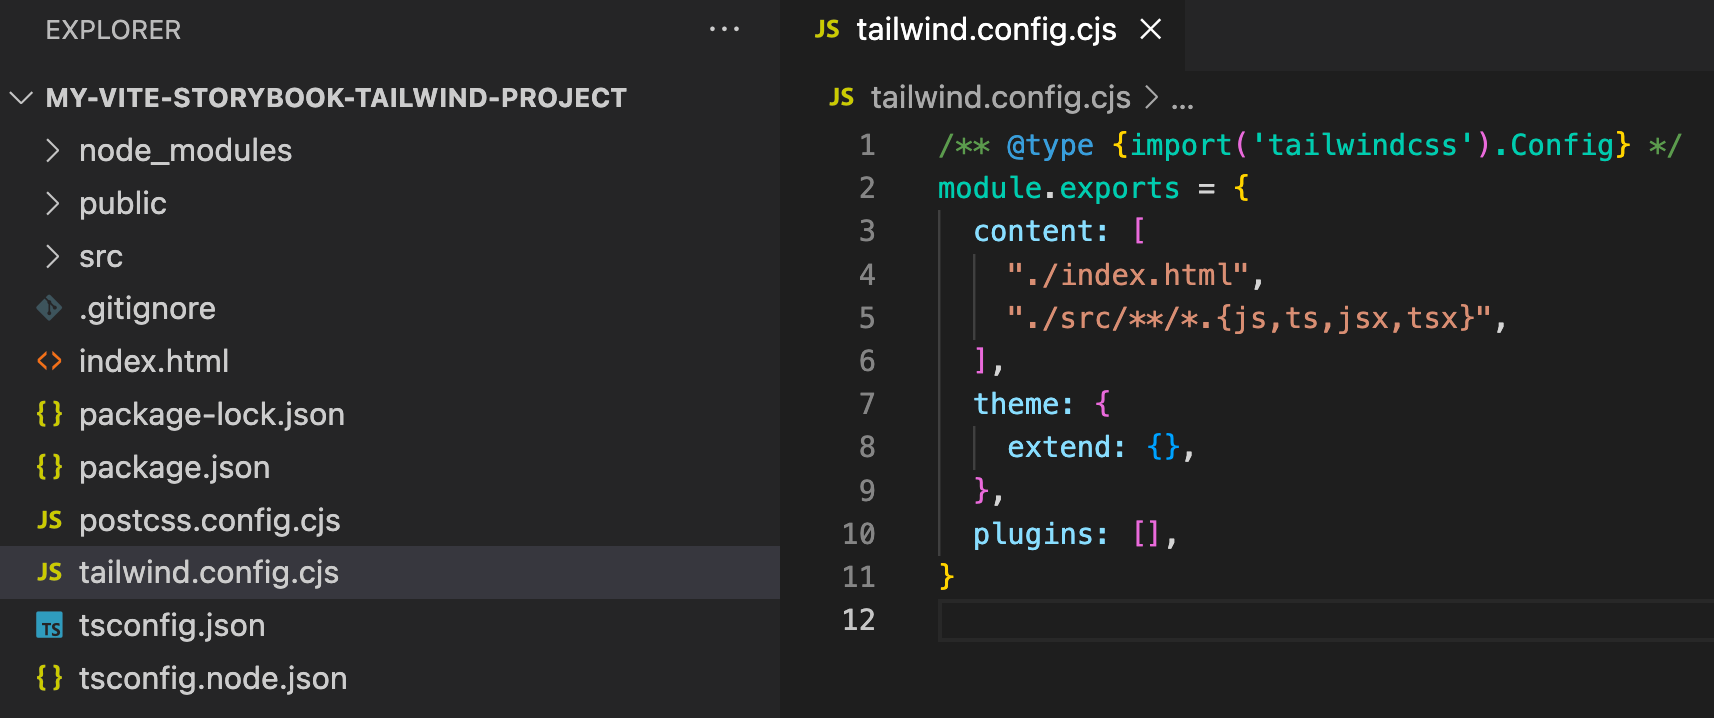 The document structure shown in VS Code